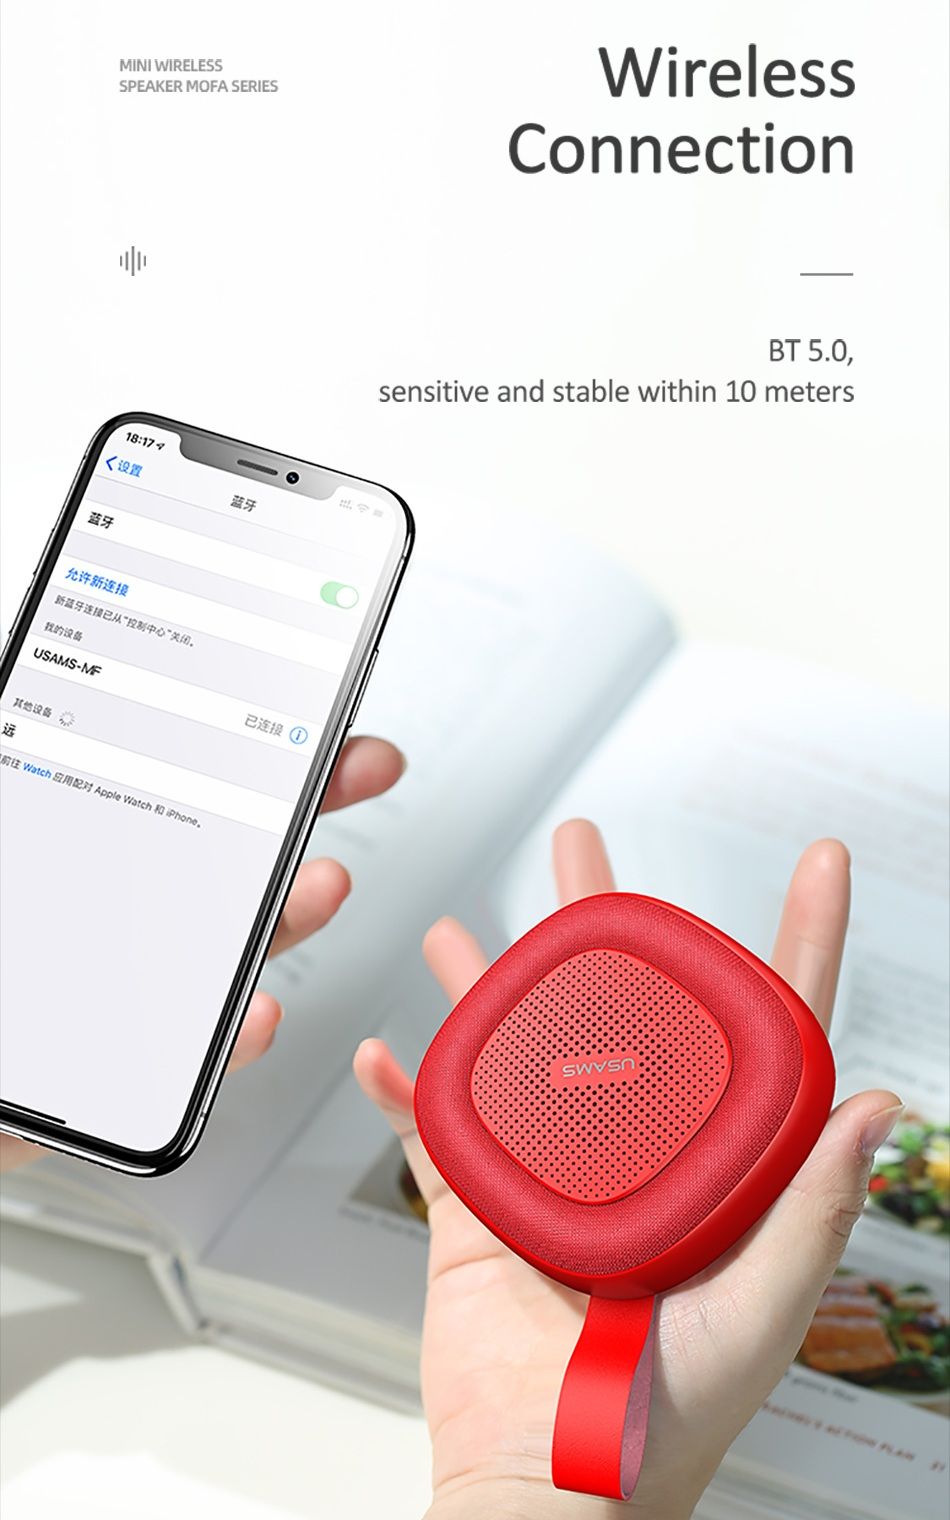 USAMS-US-YX004-Mini-Wireless-Speaker-bluetooth-50-Portable-Outdoors-TF-Card-AUX-Stereo-Speaker-with--1614784